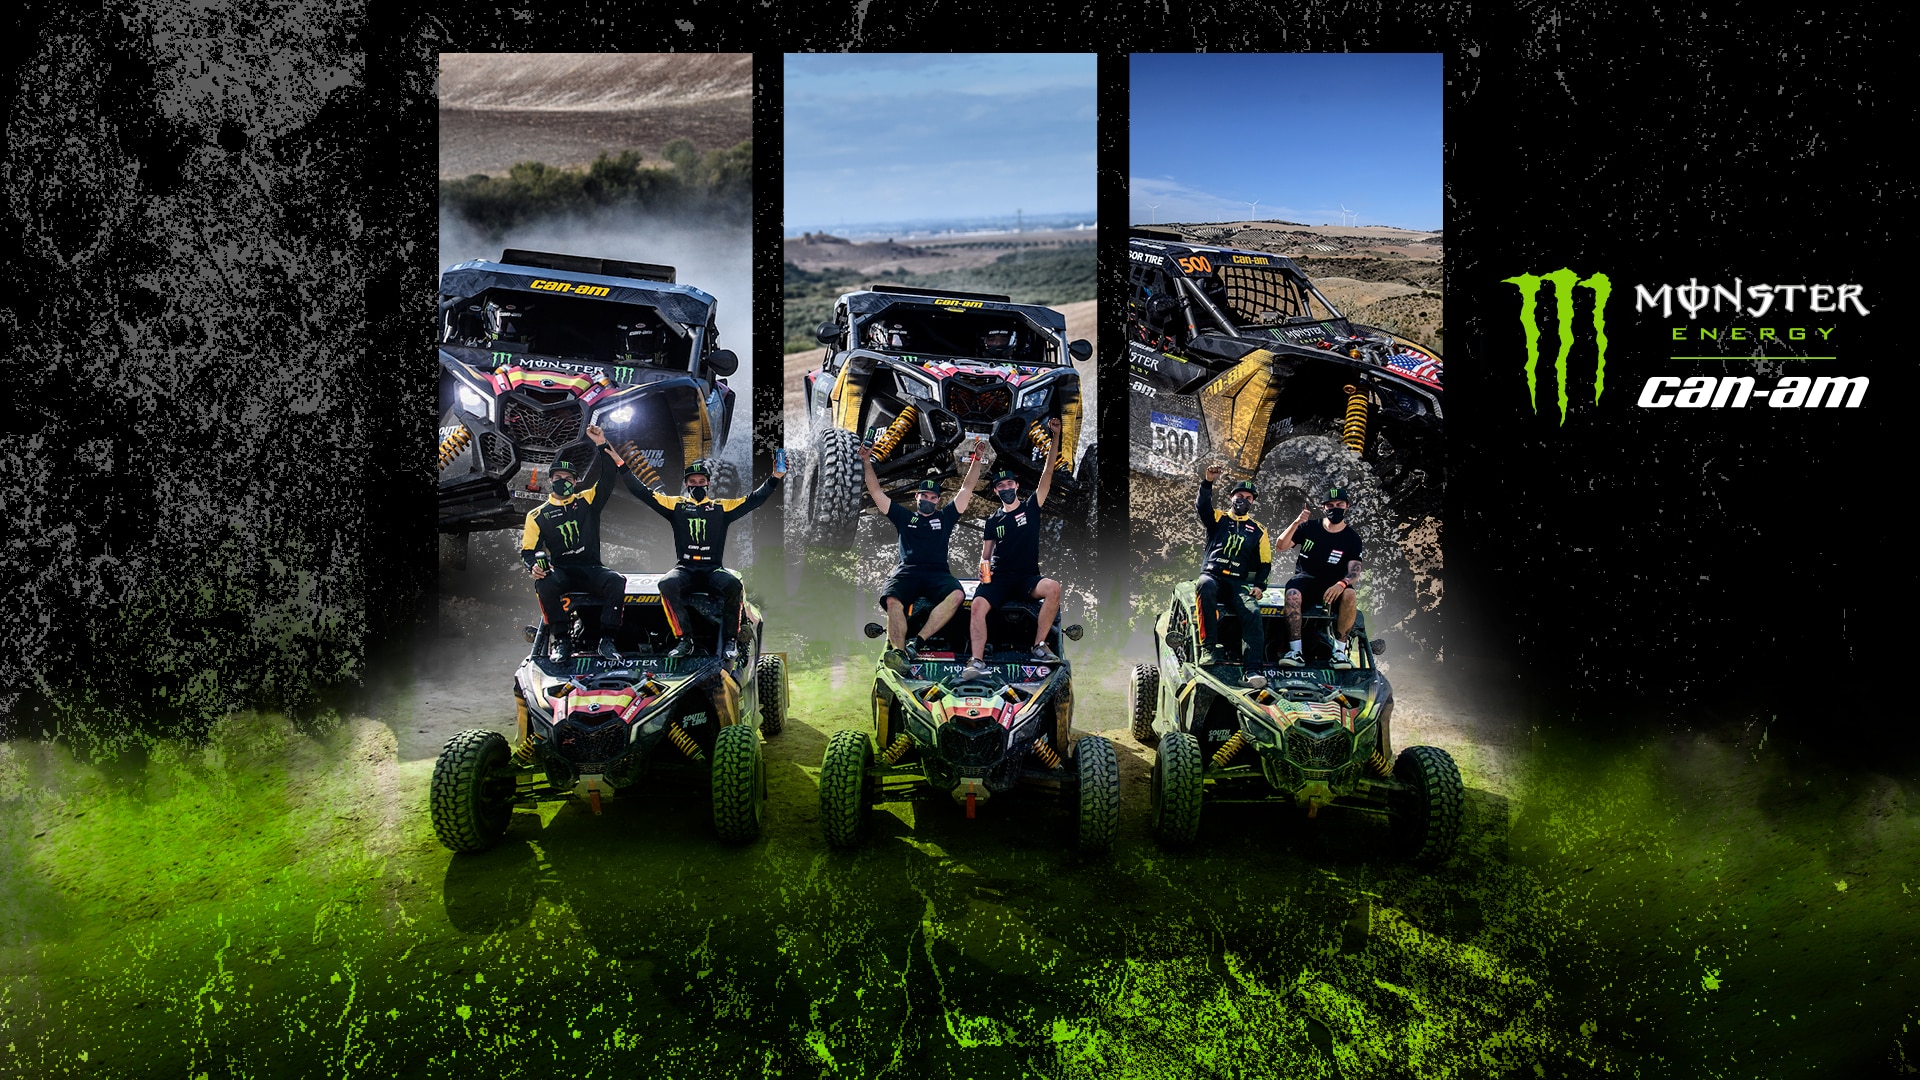 Monster Energy Can-Am racers joining the team this year